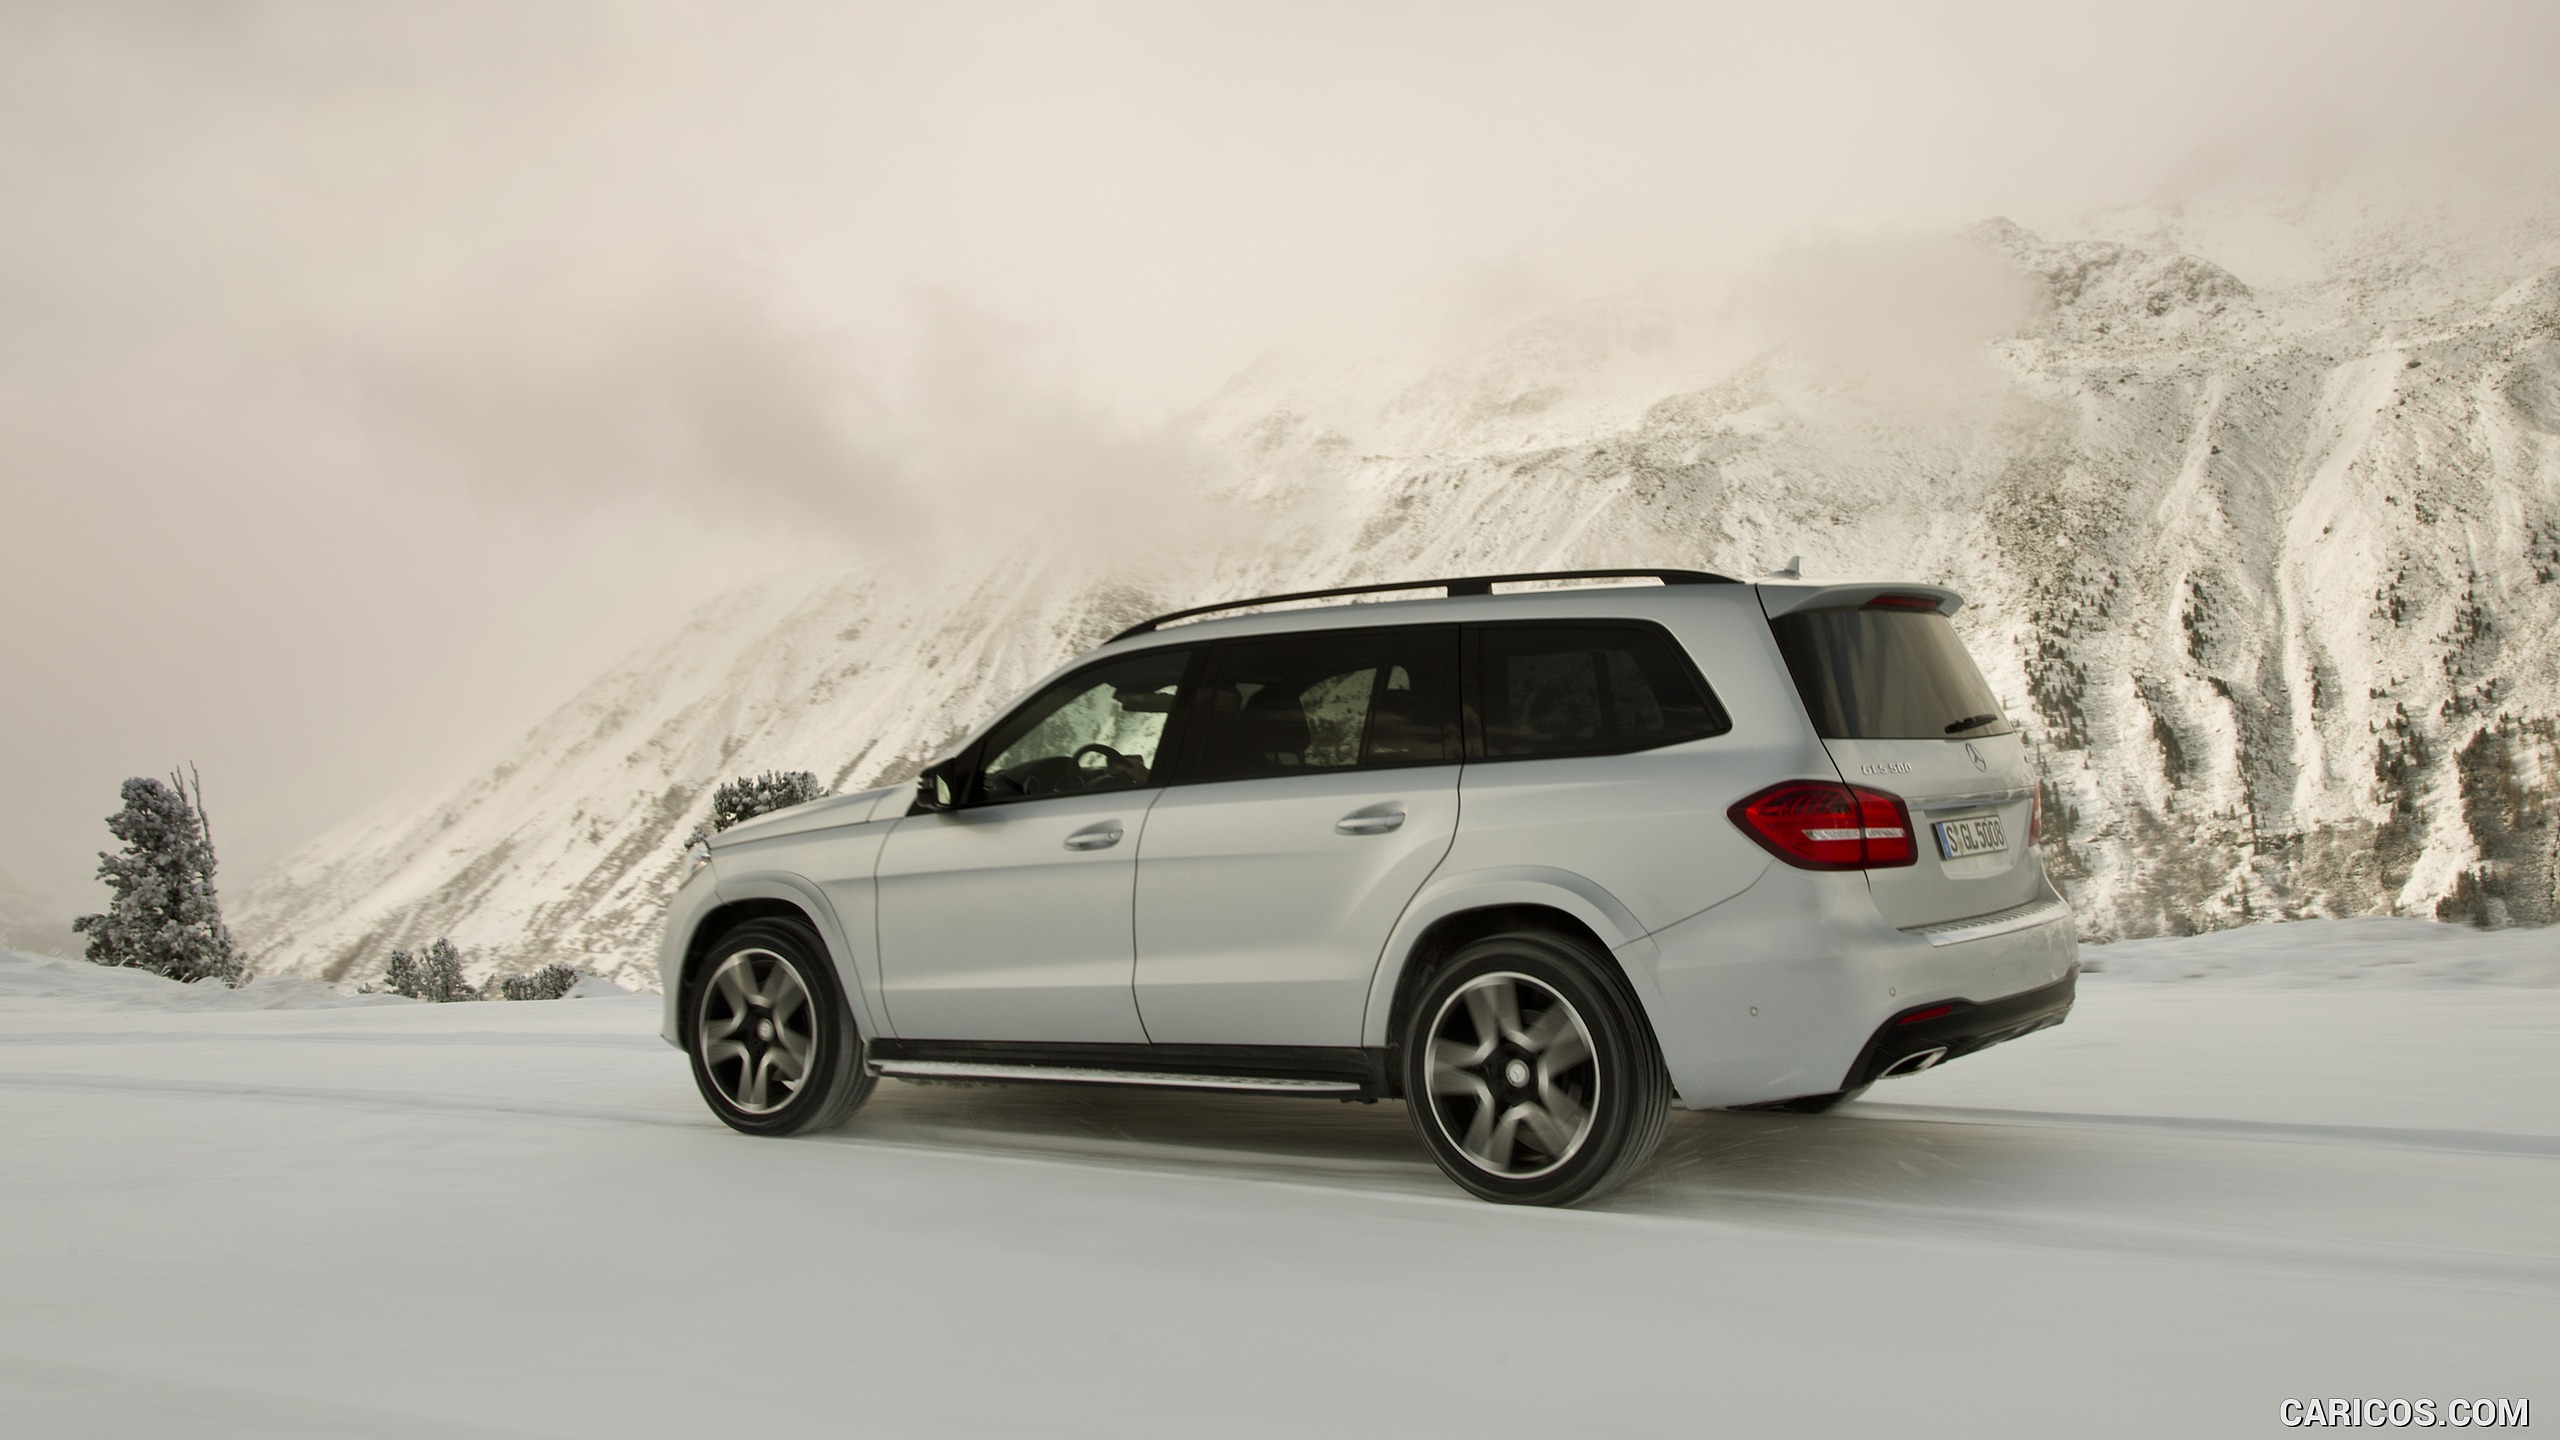 2017 Mercedes-Benz GLS 500 4MATIC AMG Line in Snow - Side, #133 of 255